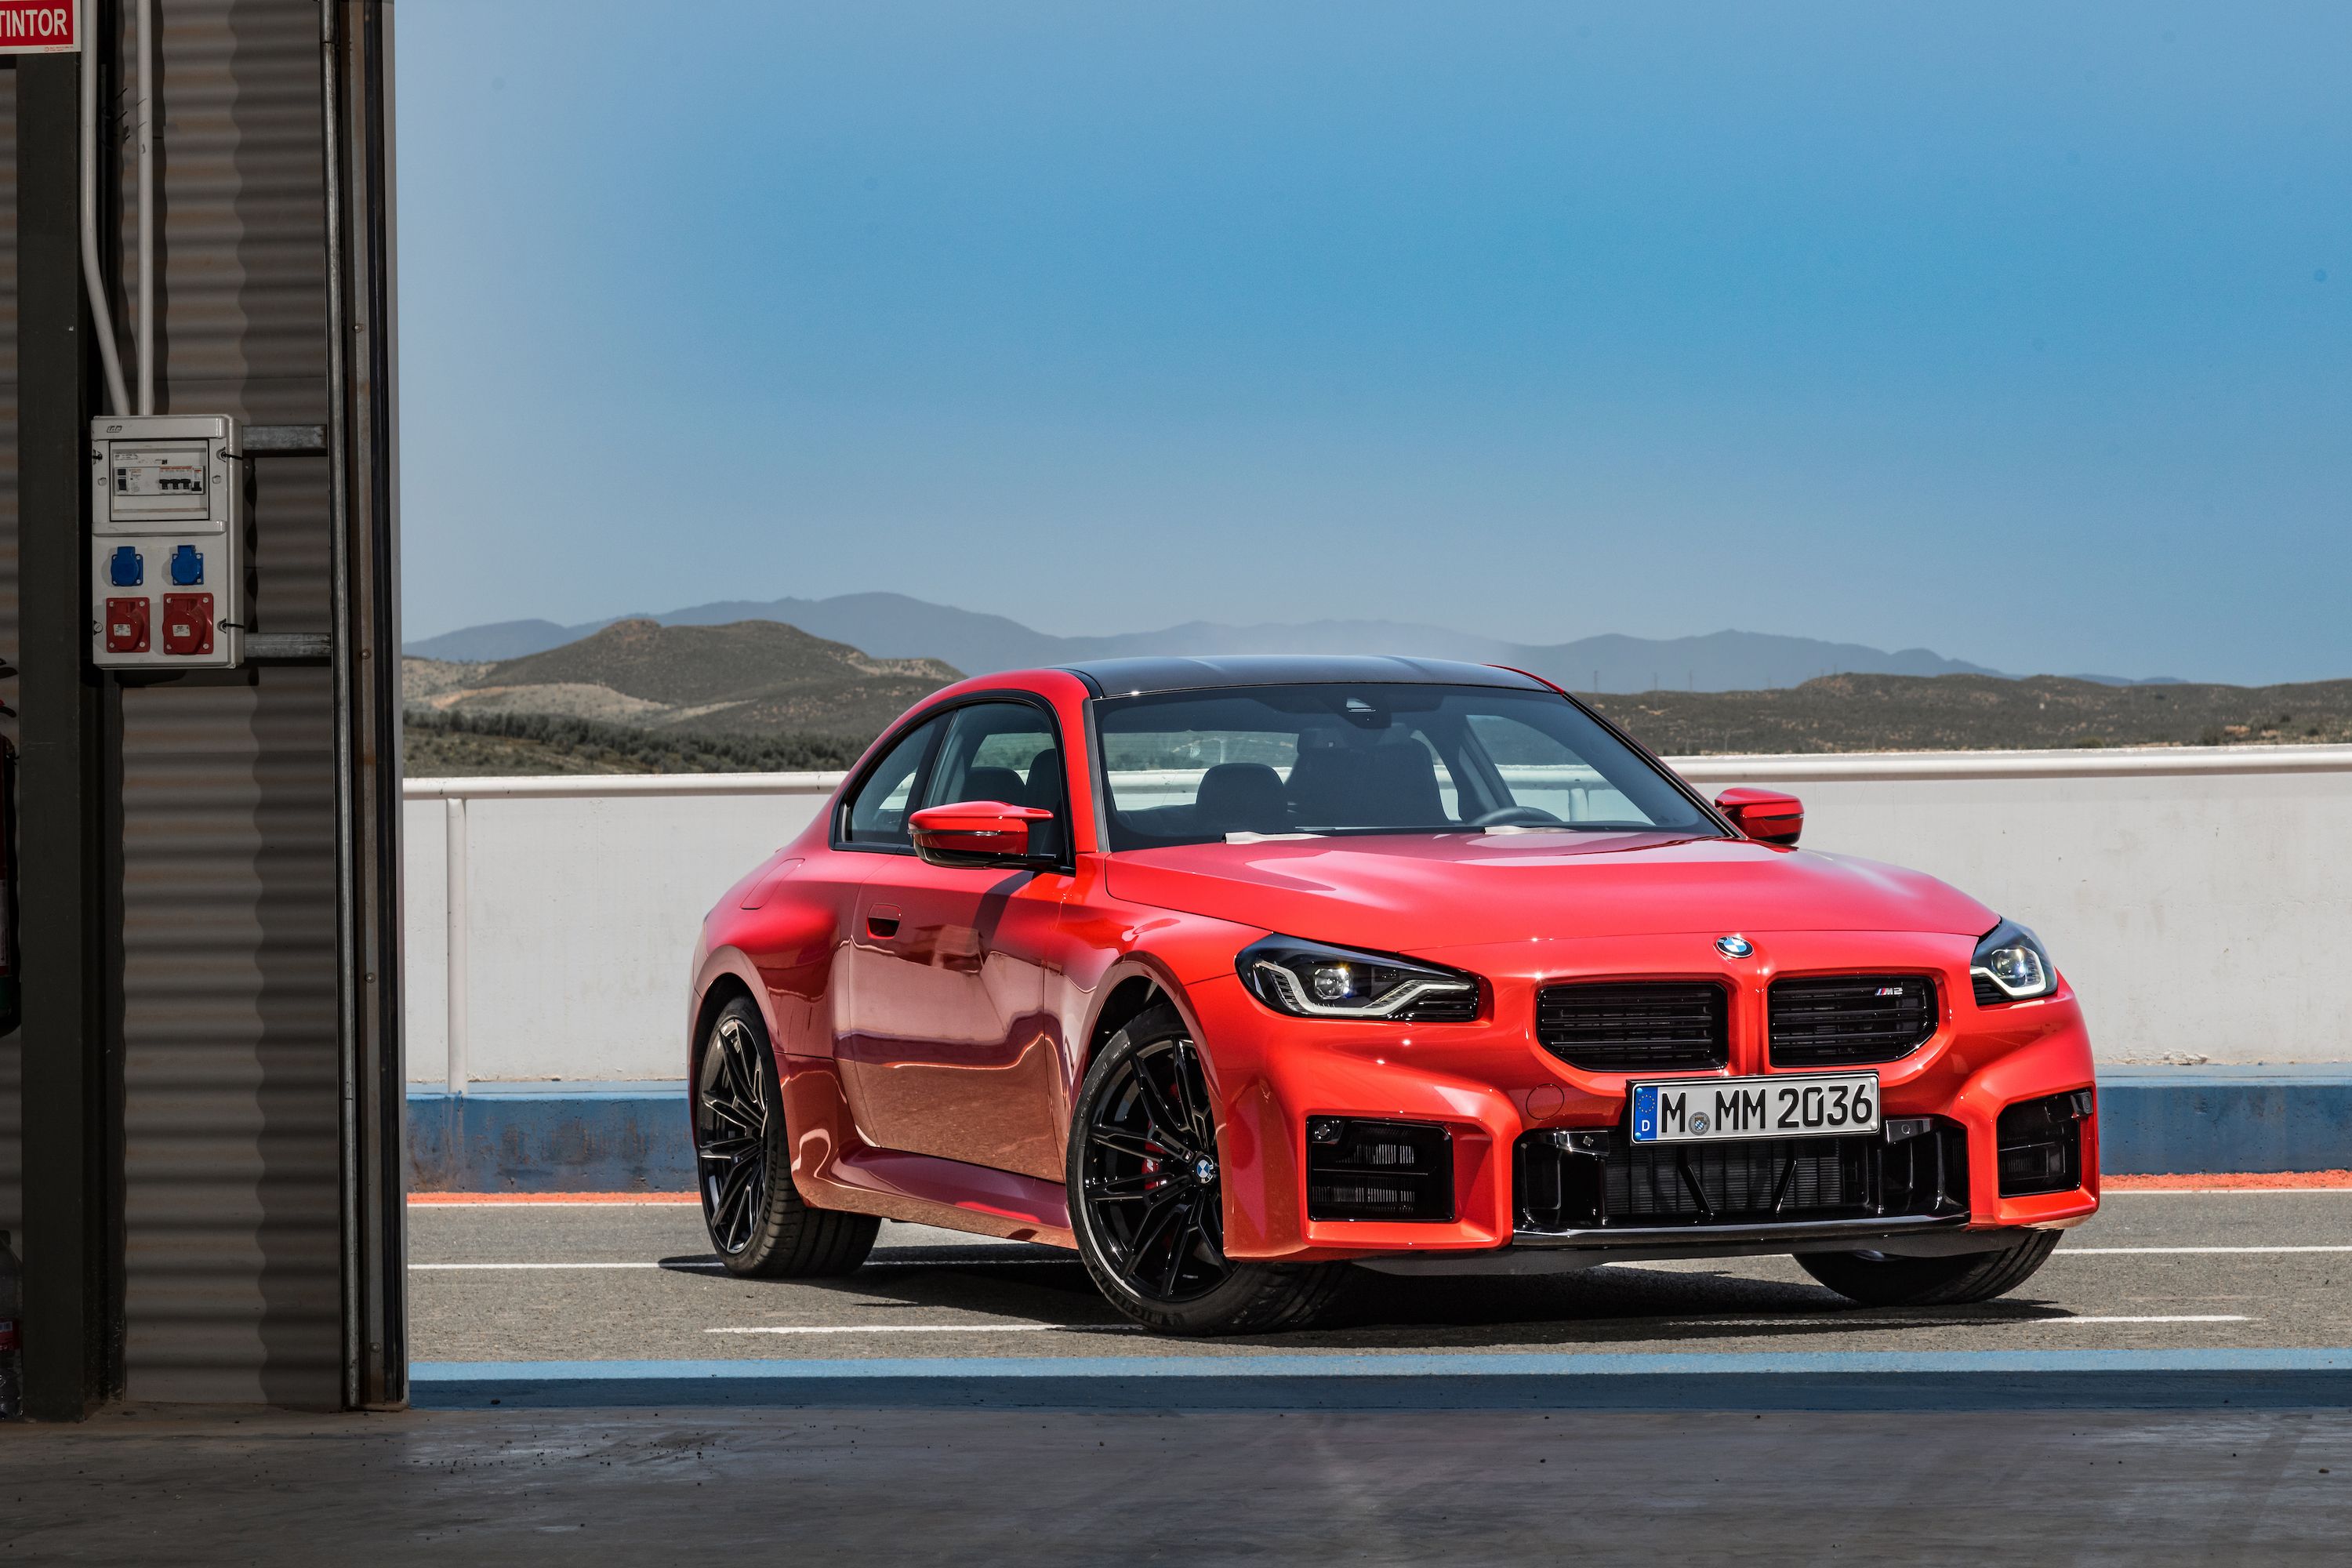 2023 BMW M2 First Drive Review: The Best M Car Is Back